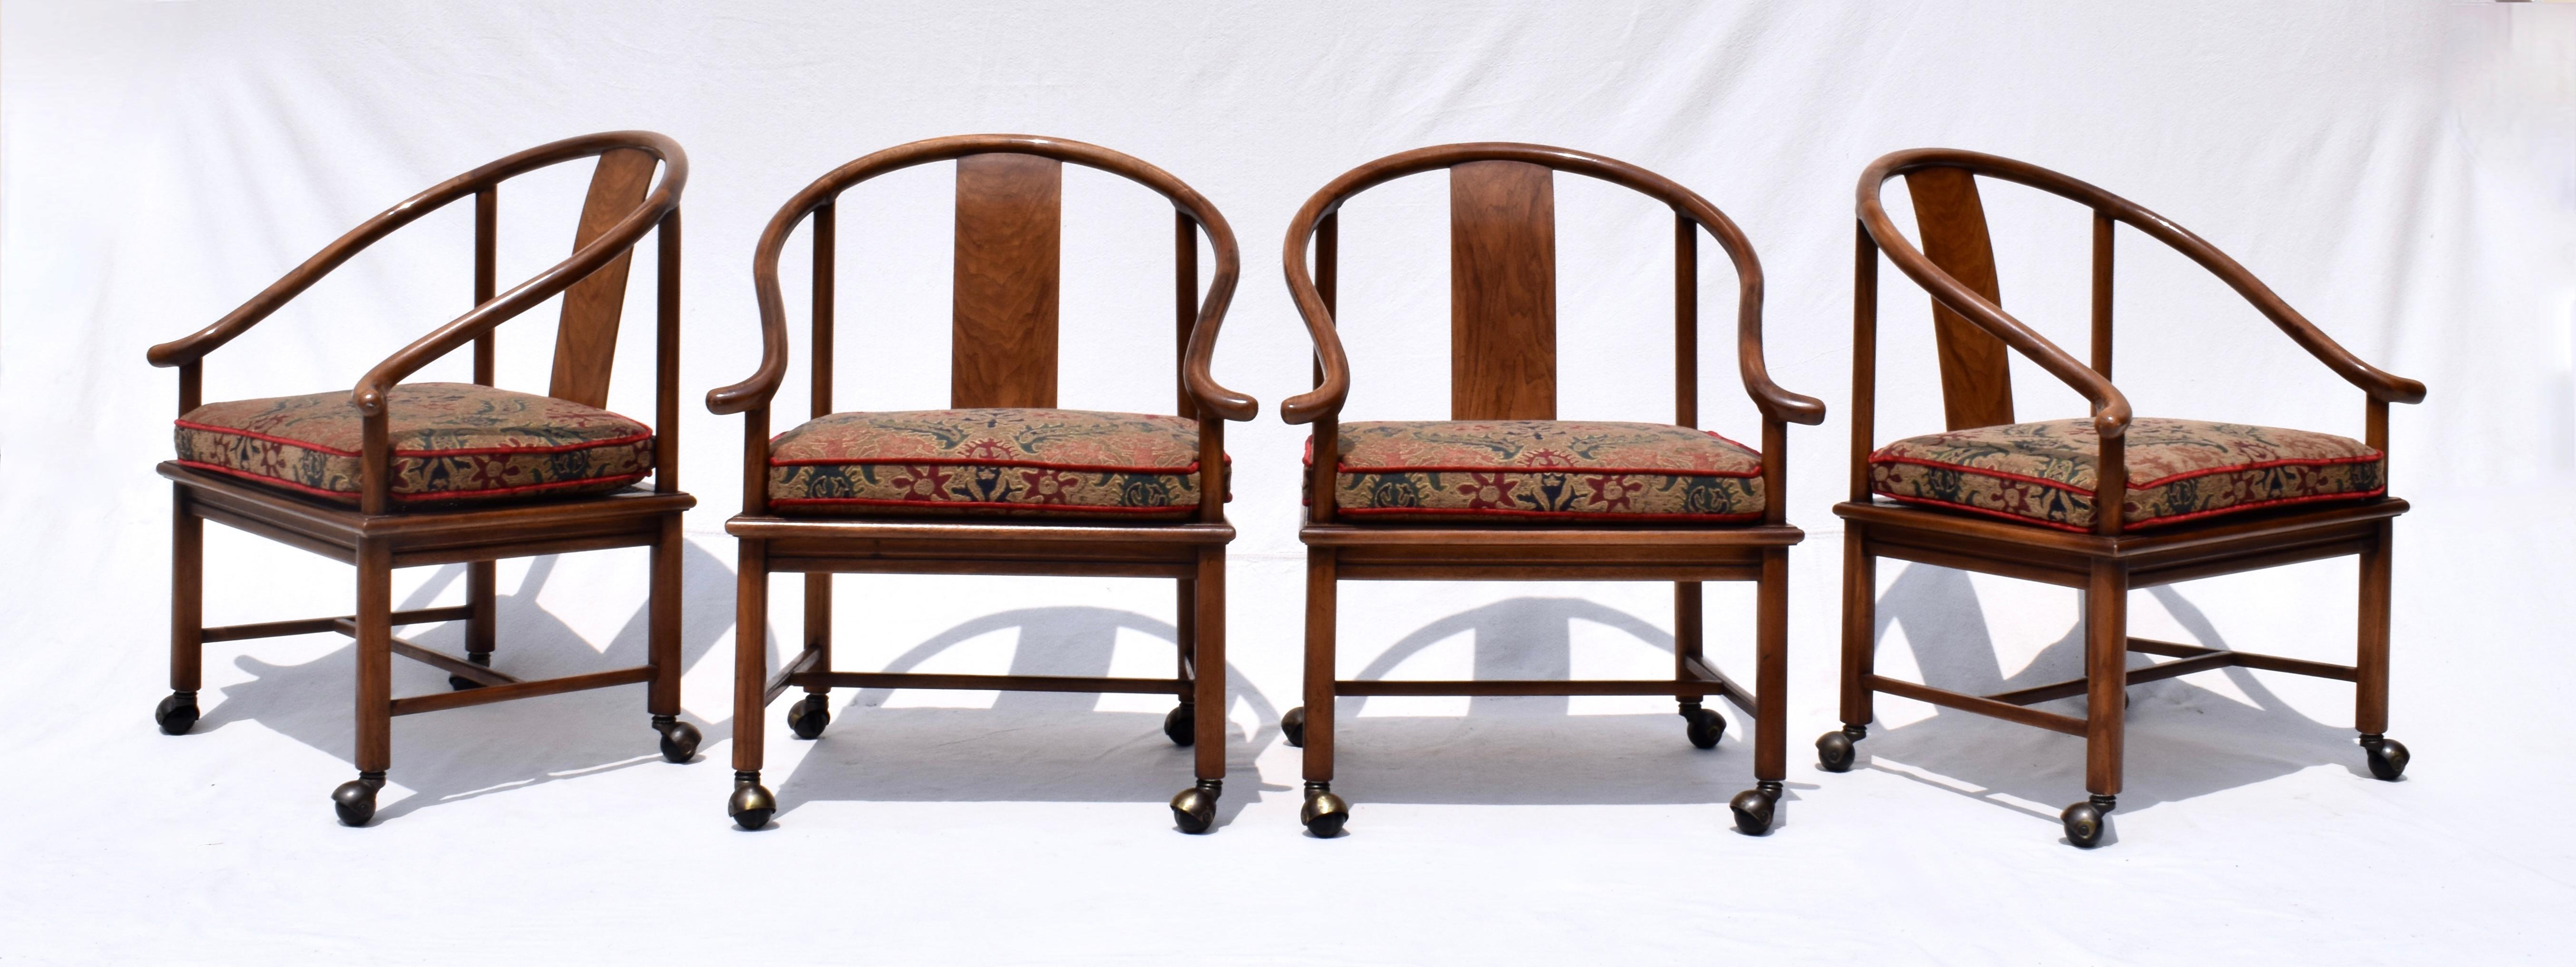 20th c. Modern Ming Horseshoe Chairs With Caned Seats Custom Cushions  For Sale 1